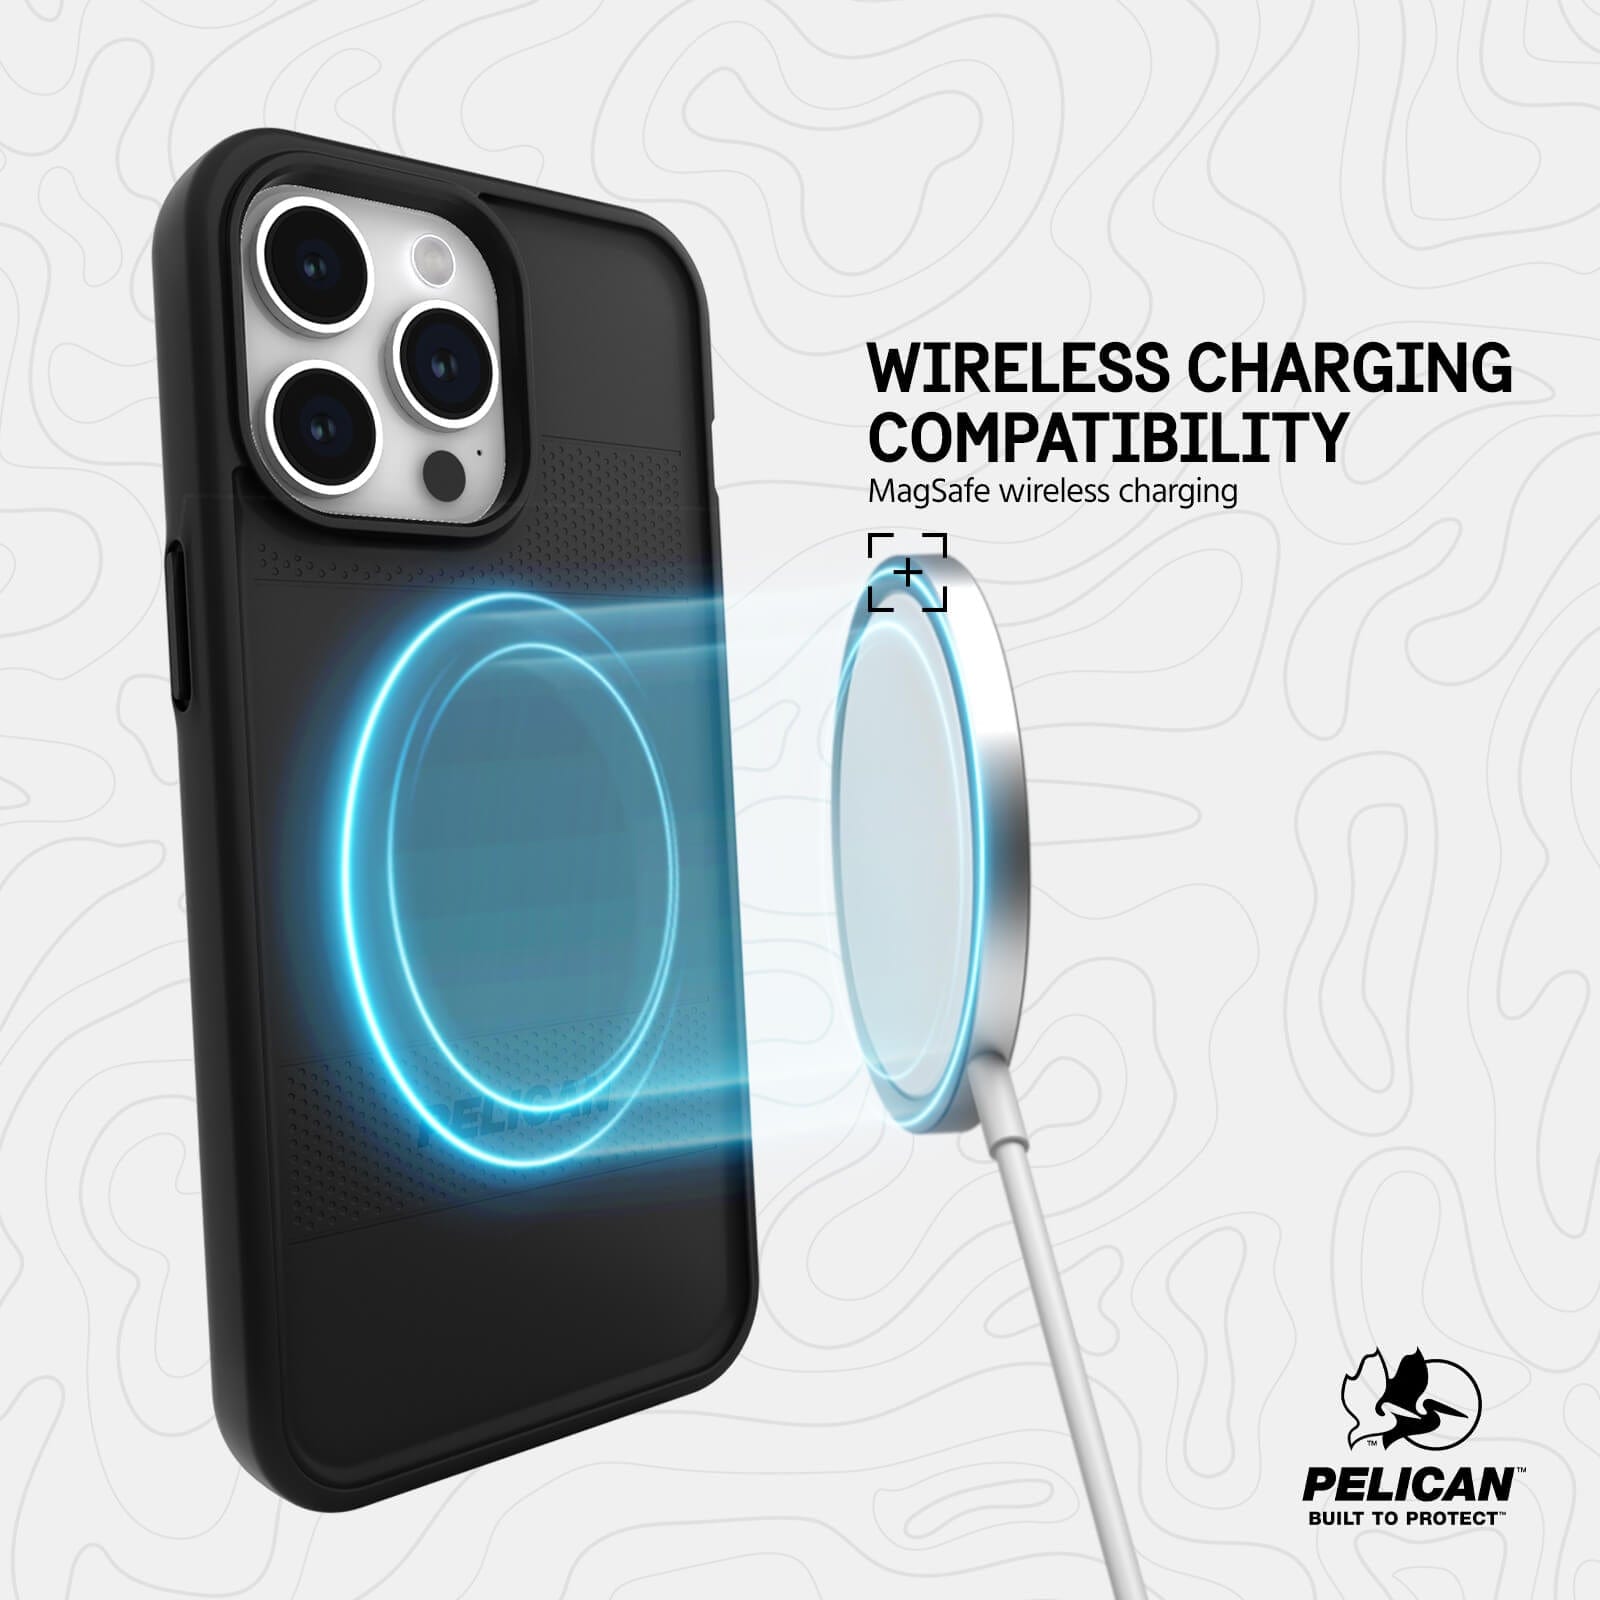 WIRELESS CHARGING COMPATIBILITY. MAGSAFE WIRELESS CHARGING